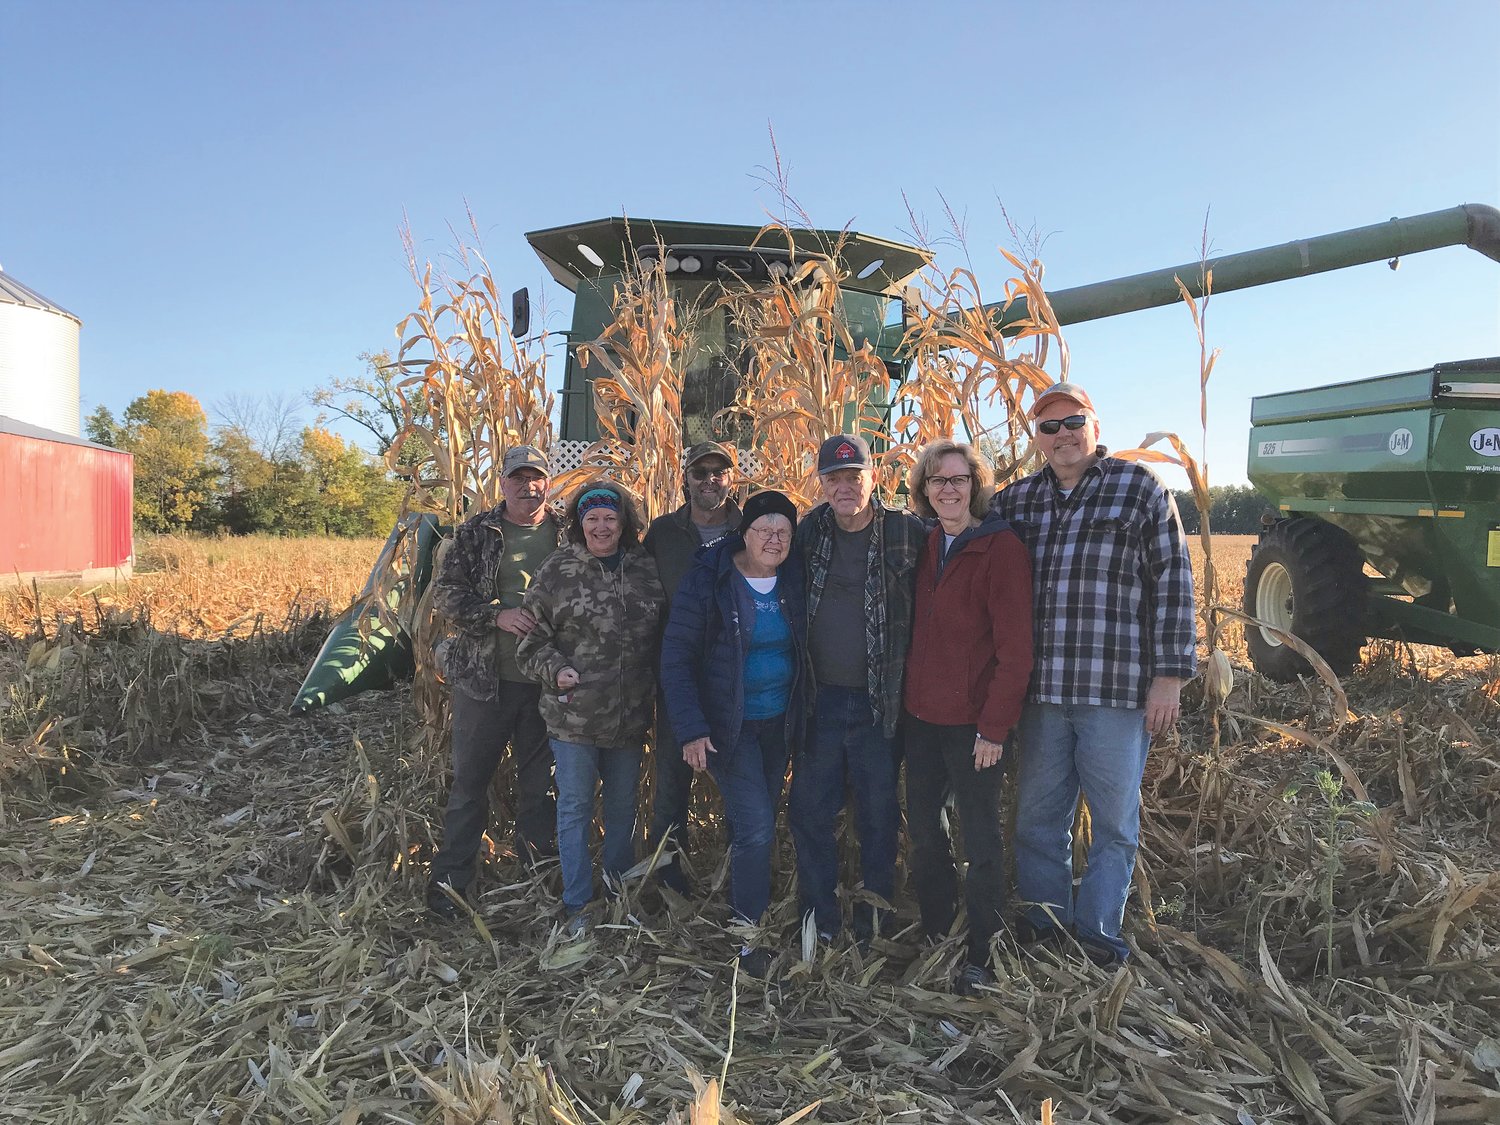 Members of the McBee family pose in a field during harvest this year. Four generations of the McBee family have worked the farm started by Jerry’s grandfather, Martin Z. McBee in 1902. This year marks the end of that generational family farming.